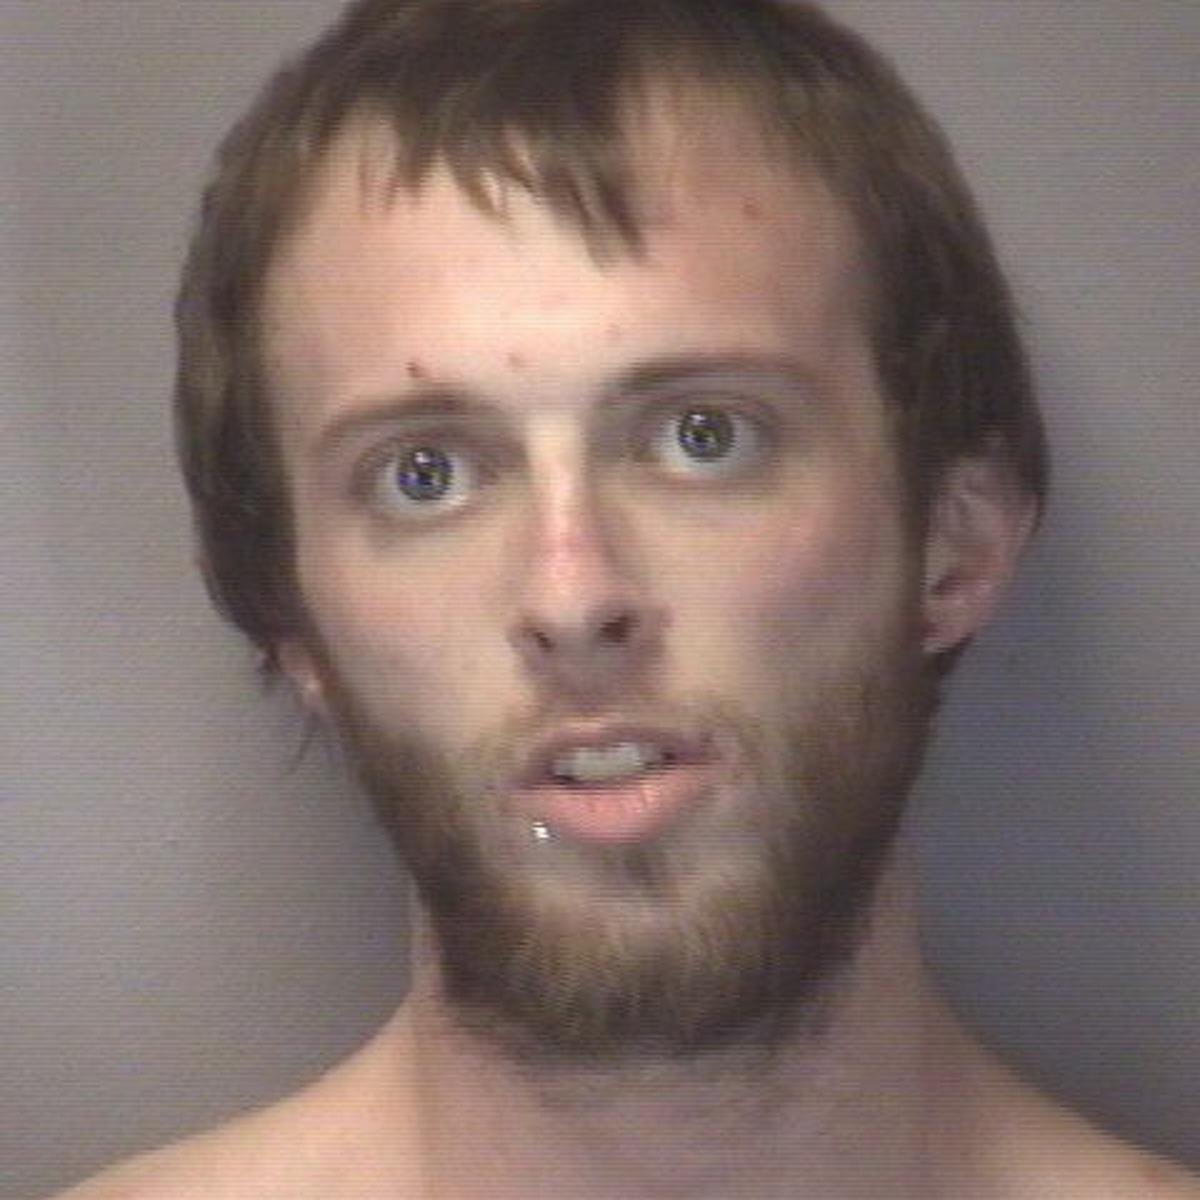 Police Charge Hickory Man With Meth Possession At Red Roof Inn Latest Headlines Hickoryrecord Com